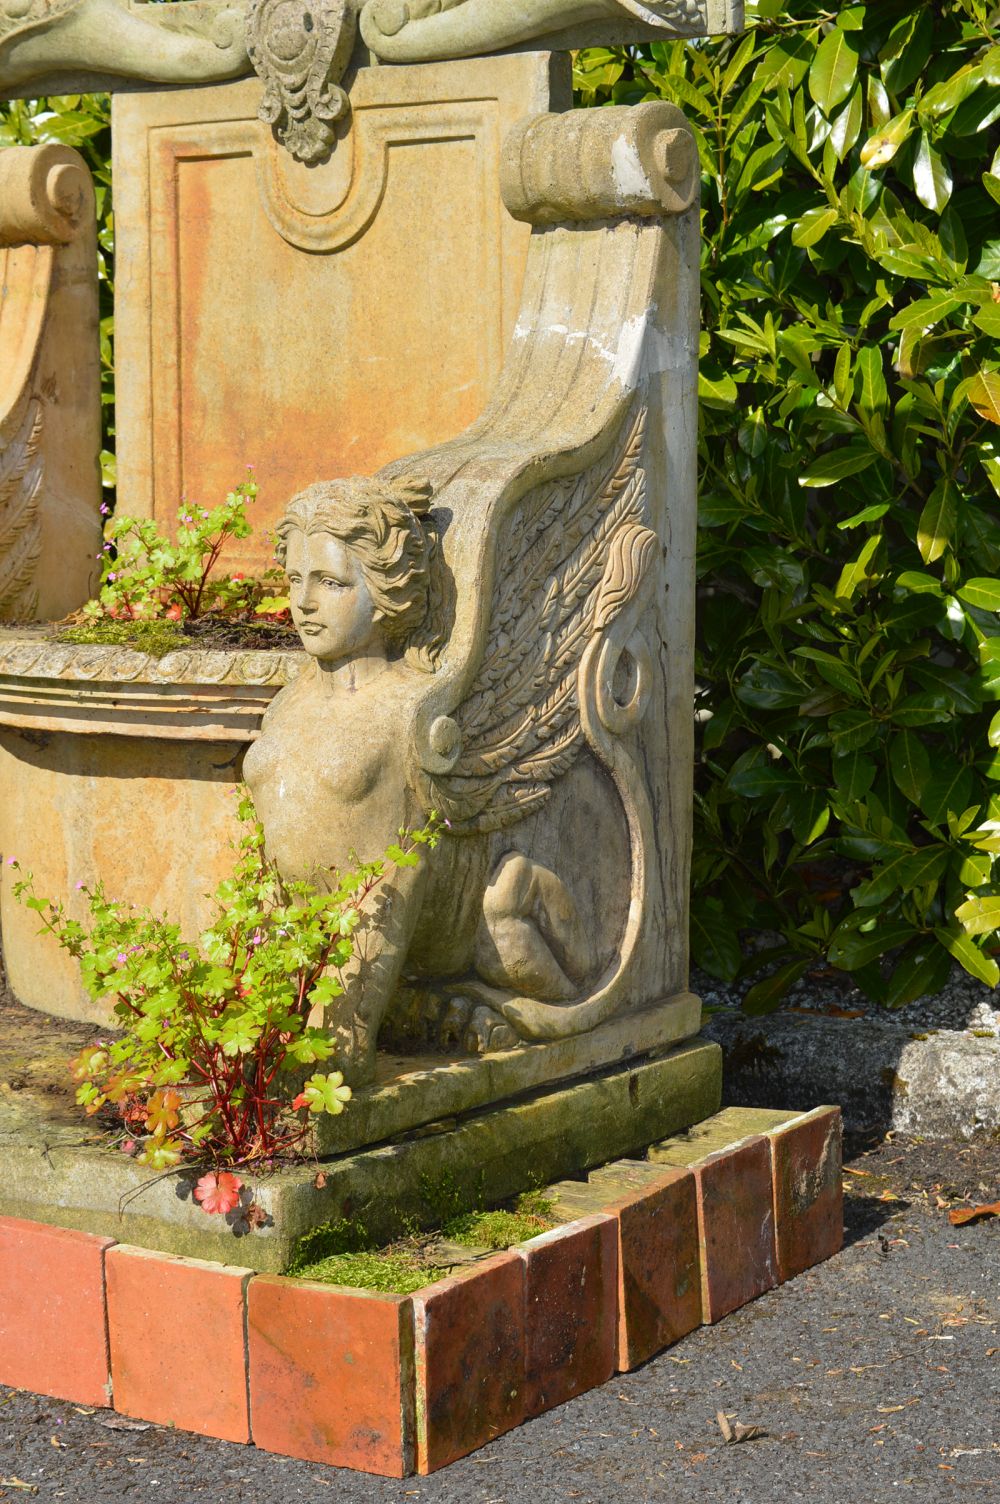 MOULDED STONE CEREMONIAL GARDEN SEAT - Image 3 of 7